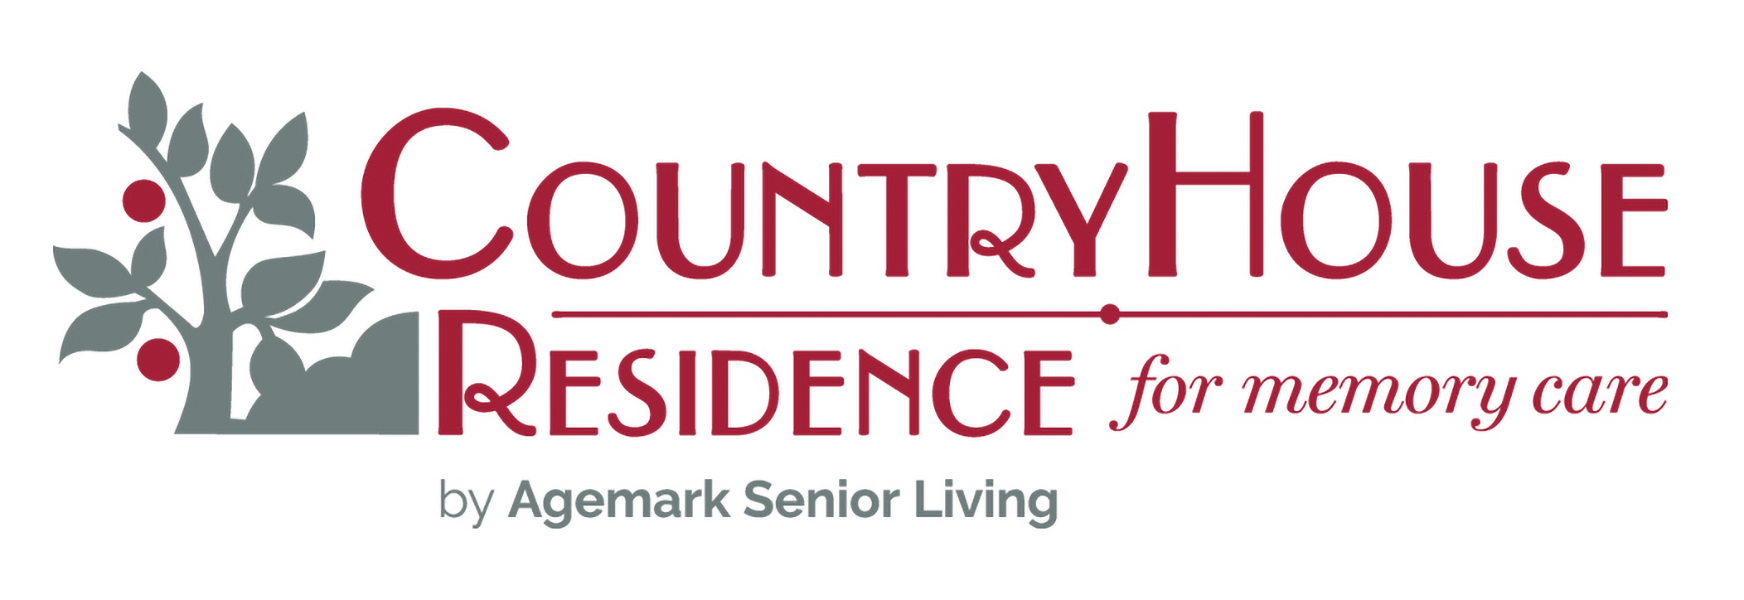 country house logo